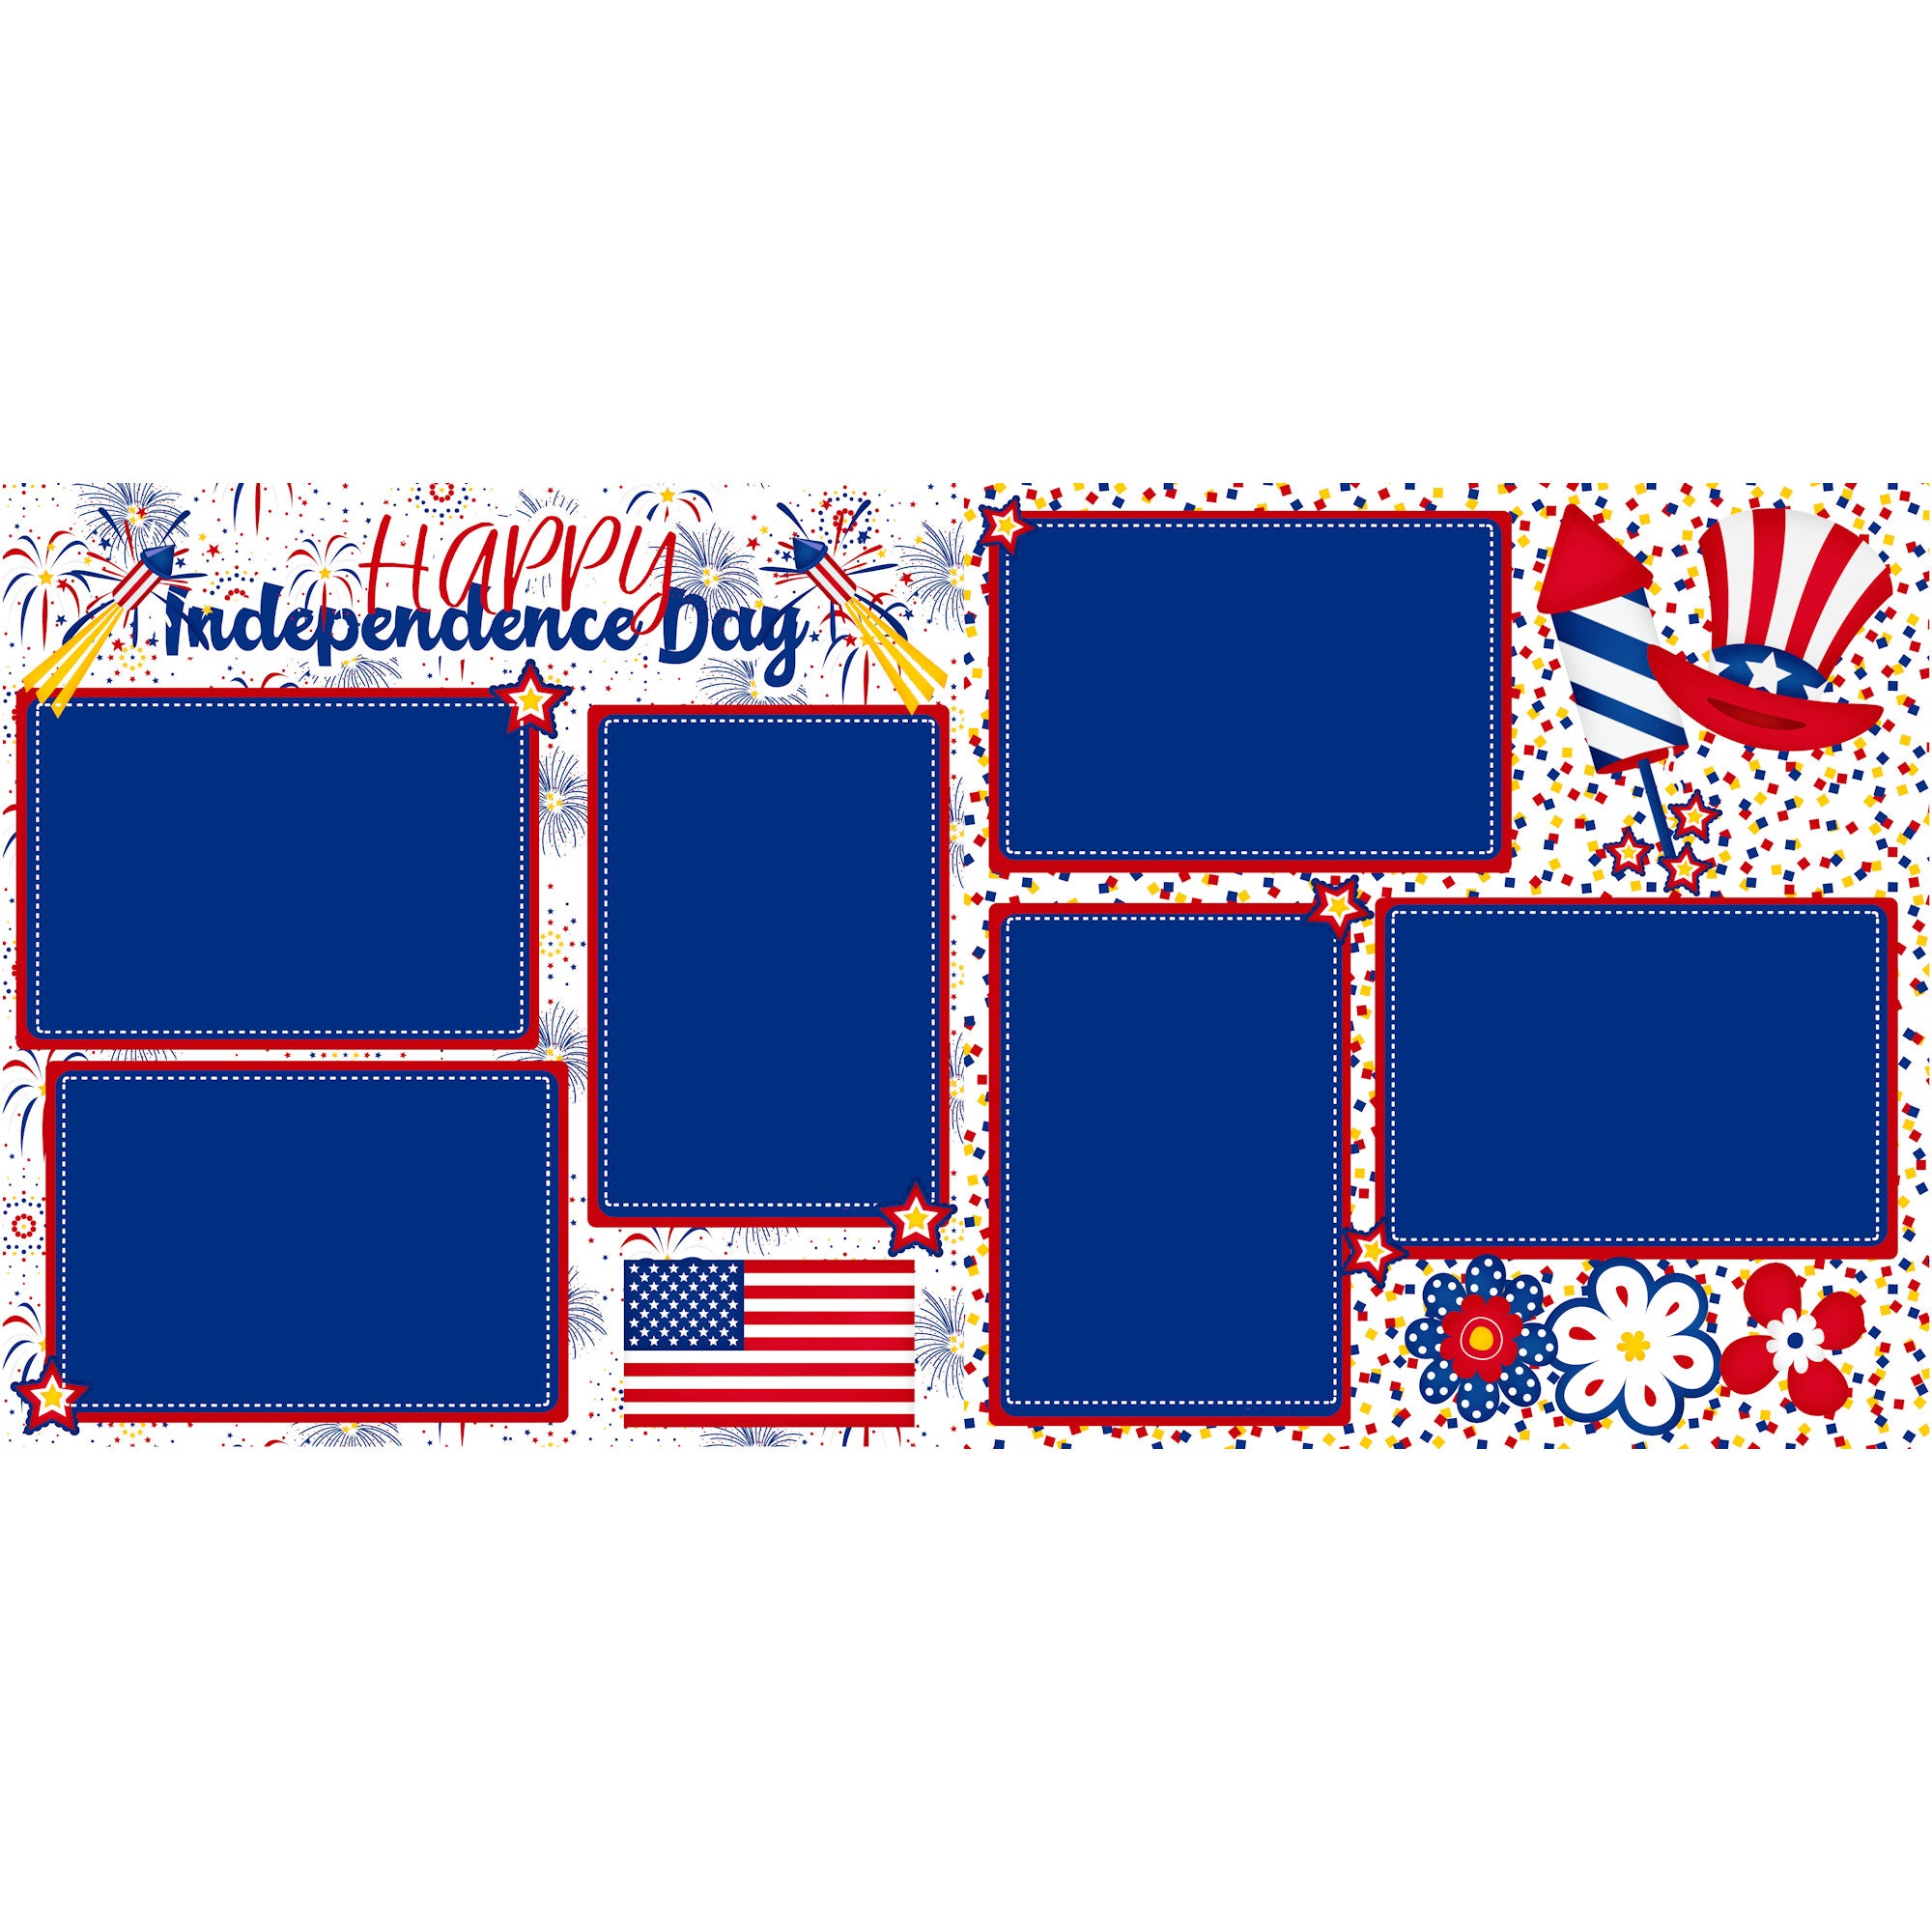 Patriotic Collection Happy Independence Day (2) - 12 x 12 Premade, Printed Scrapbook Pages by SSC Designs